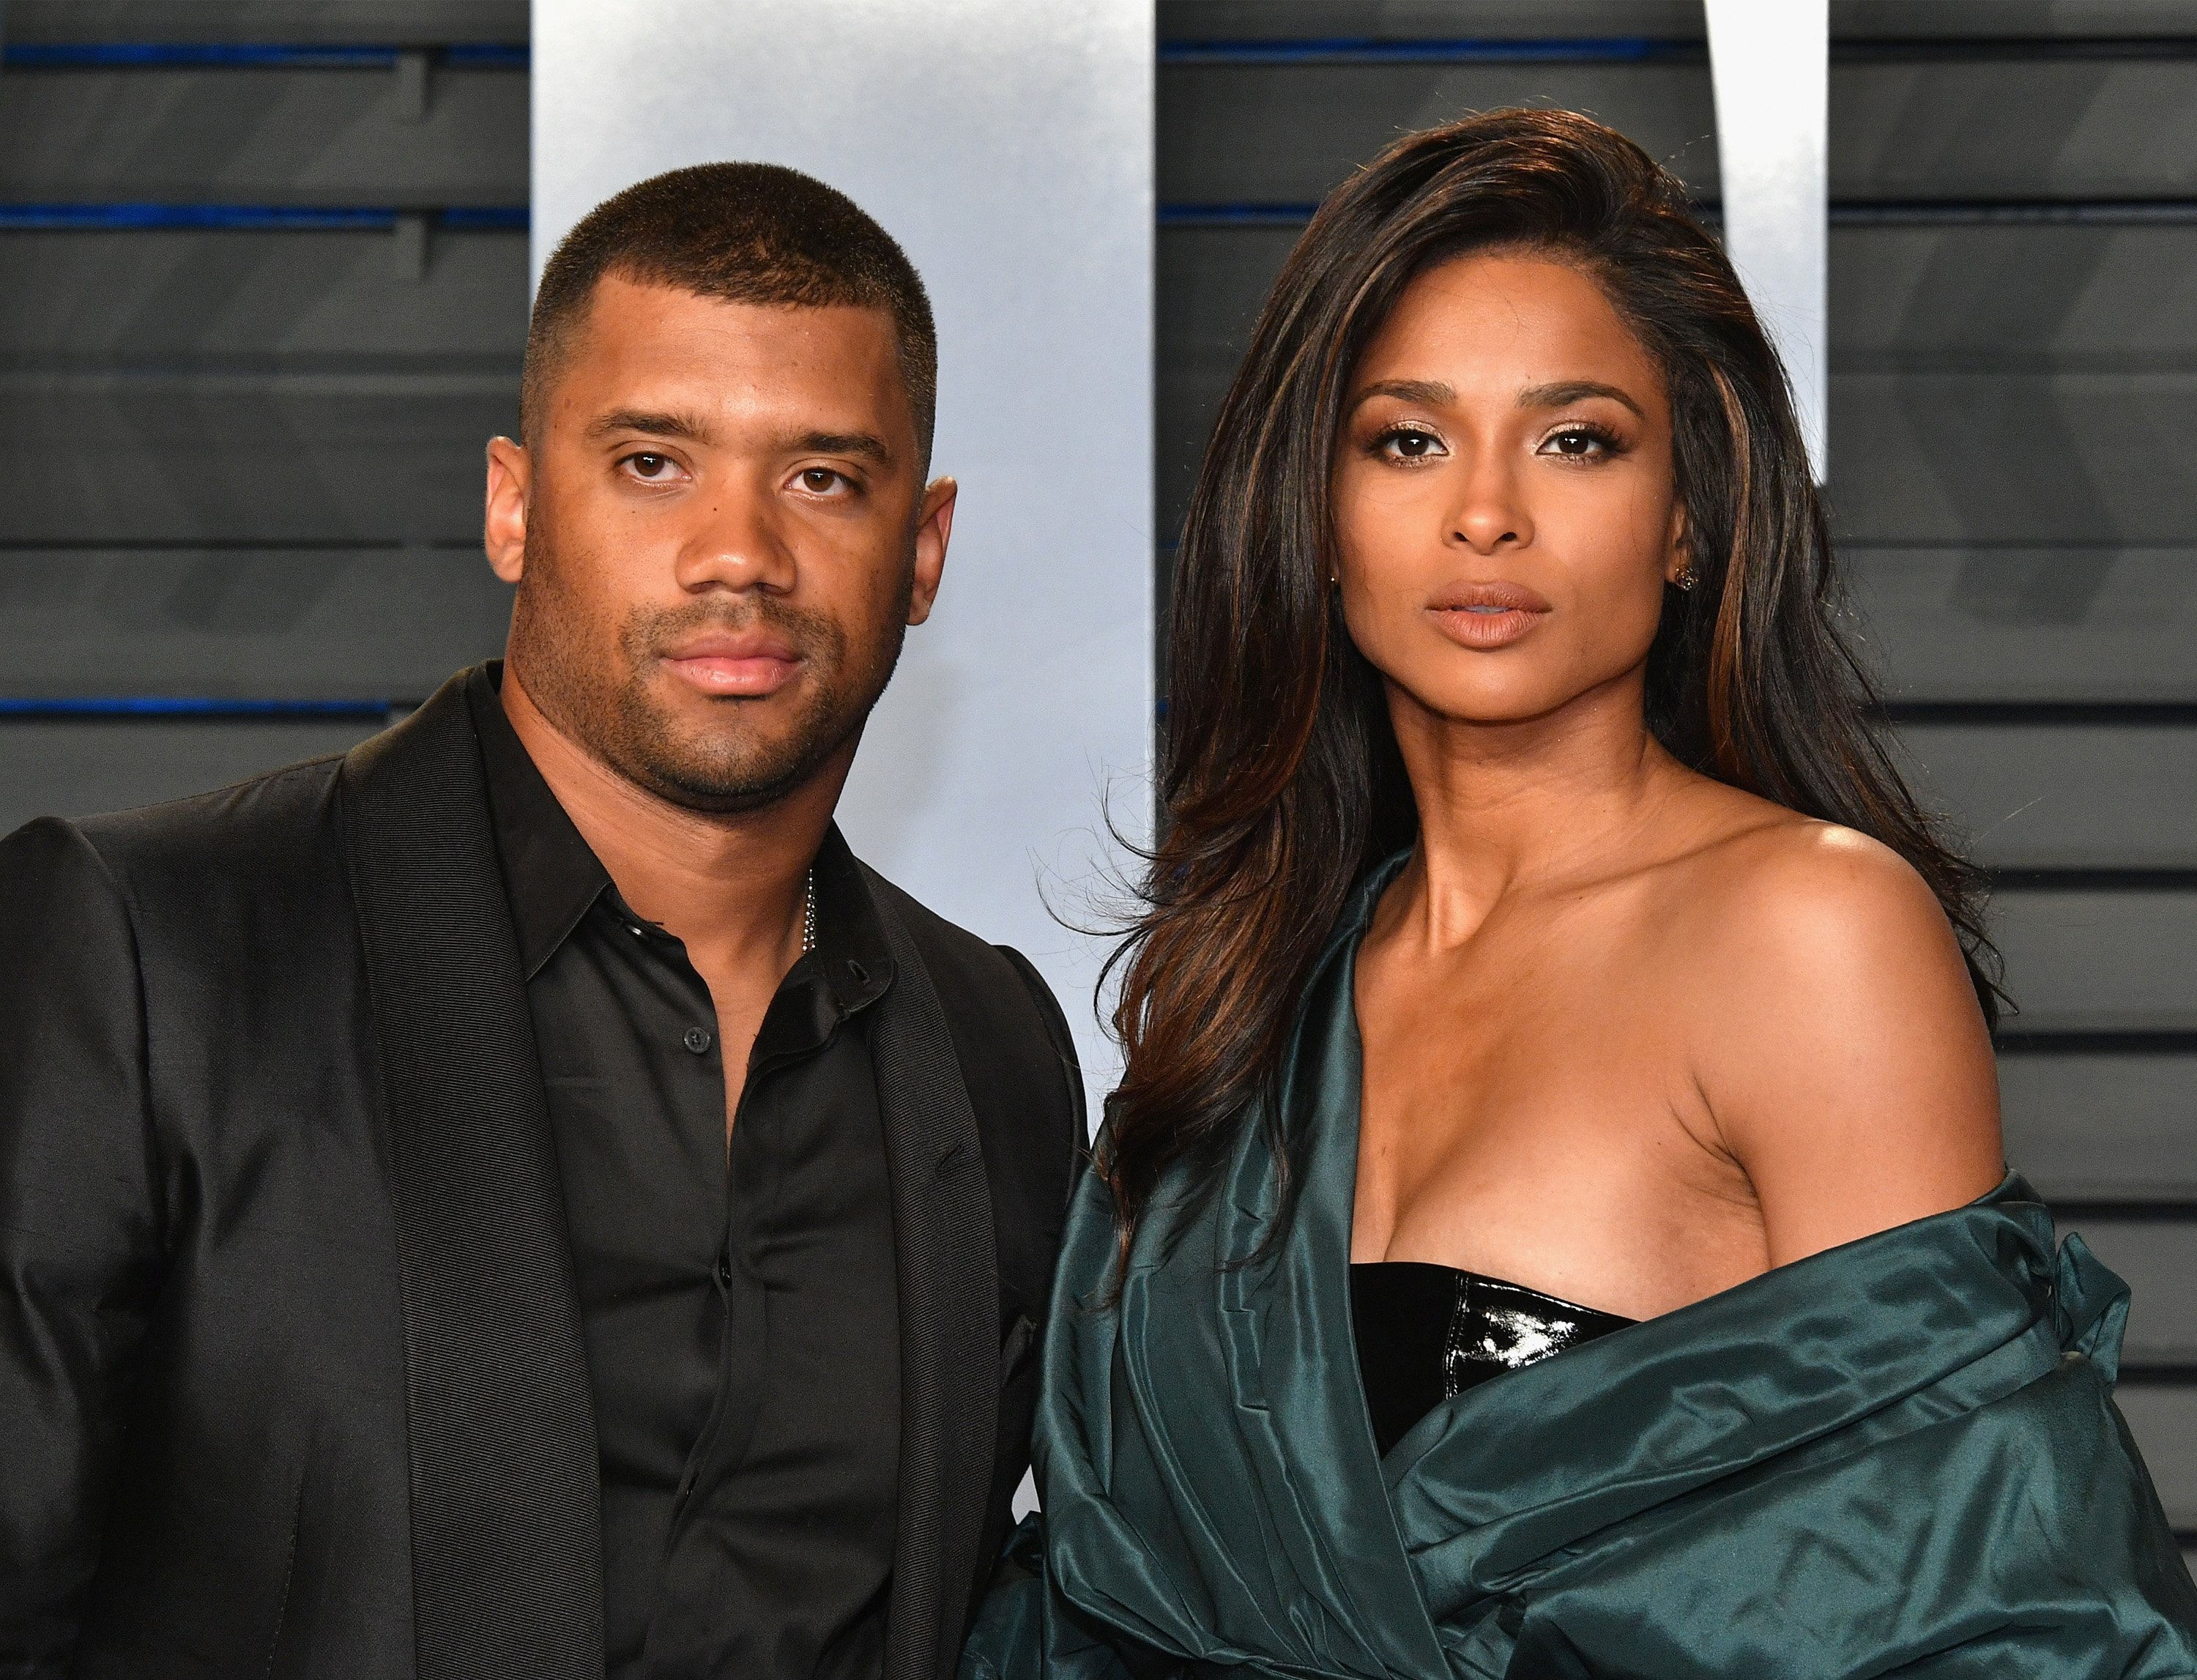 Russell Wilson and Ciara attend the 2018 Vanity Fair Oscar Party hosted by Radhika Jones at Wallis Annenberg Center for the Performing Arts on March 4, 2018 in Beverly Hills, California. | Source: Getty Images